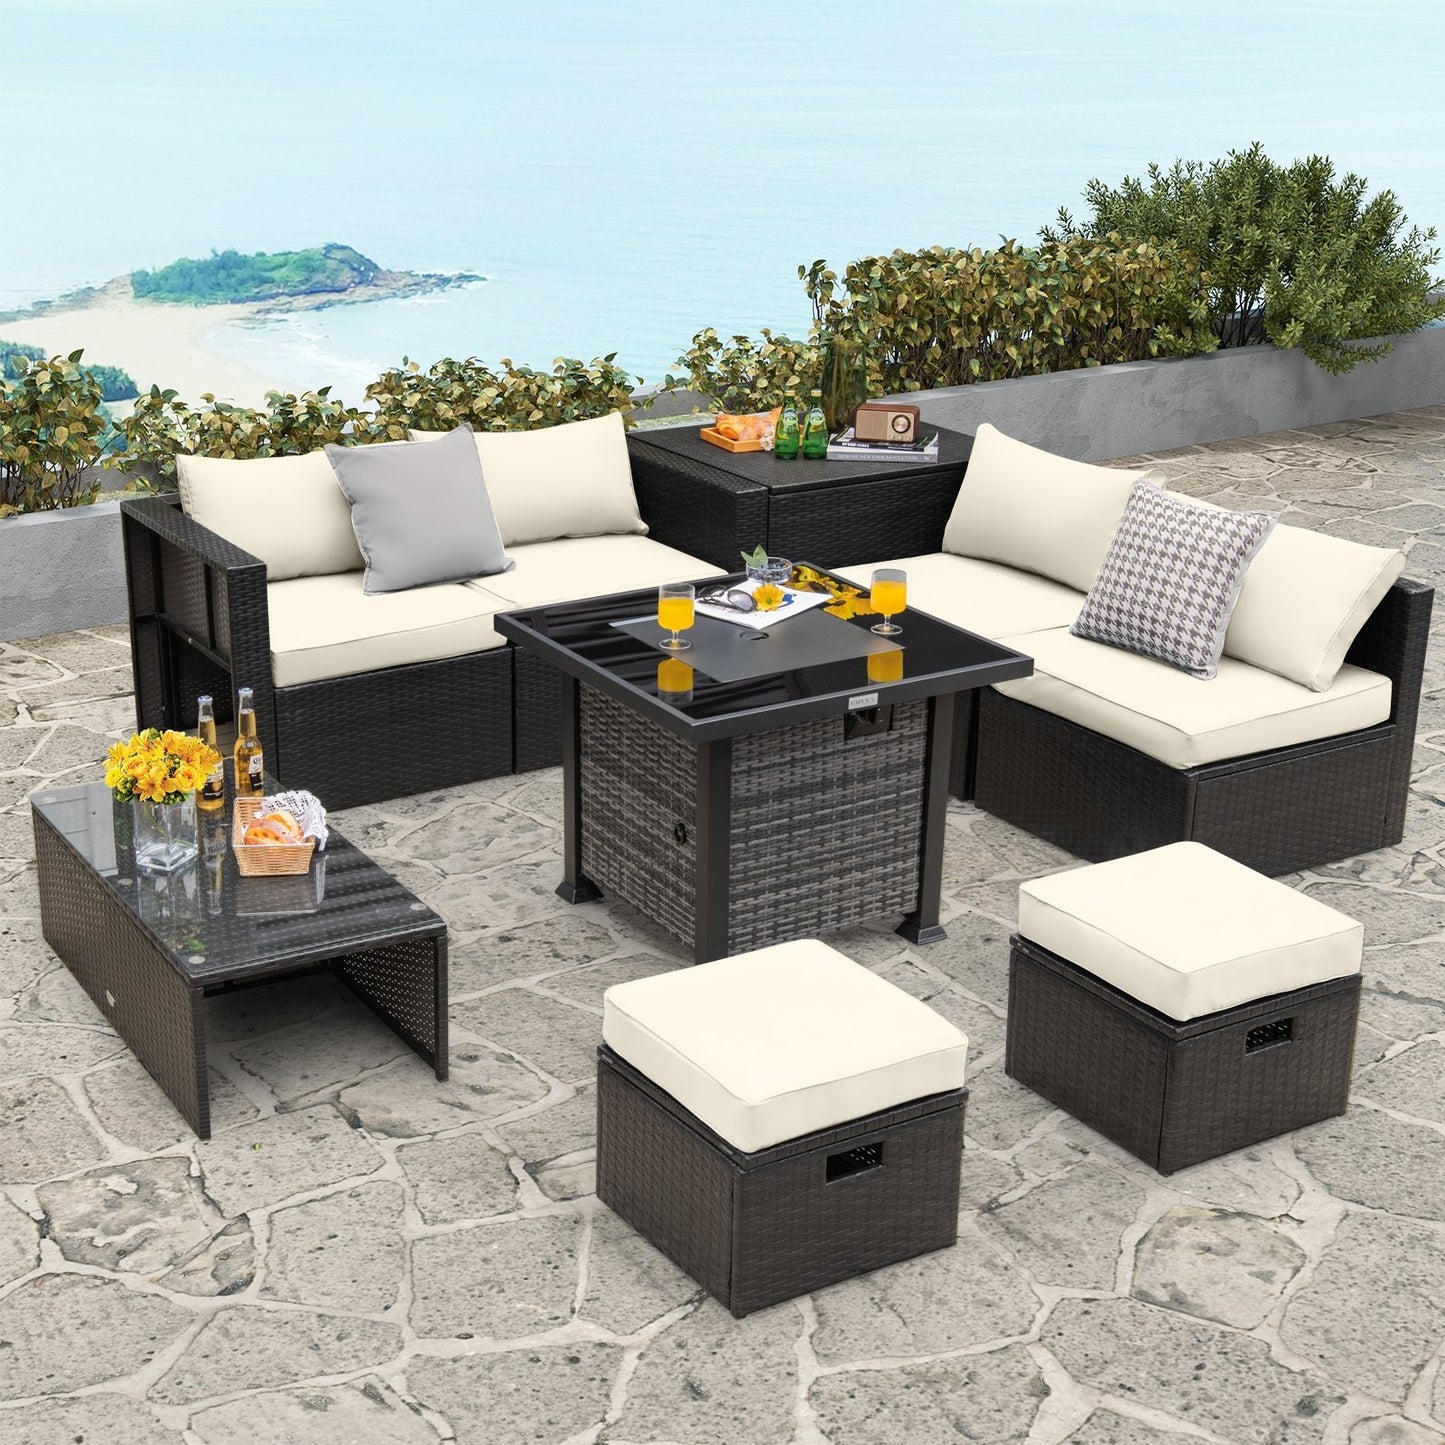 Outdoor 9 Pieces Patio Furniture Set with 50 000 BTU Propane Fire Pit Table, Off White